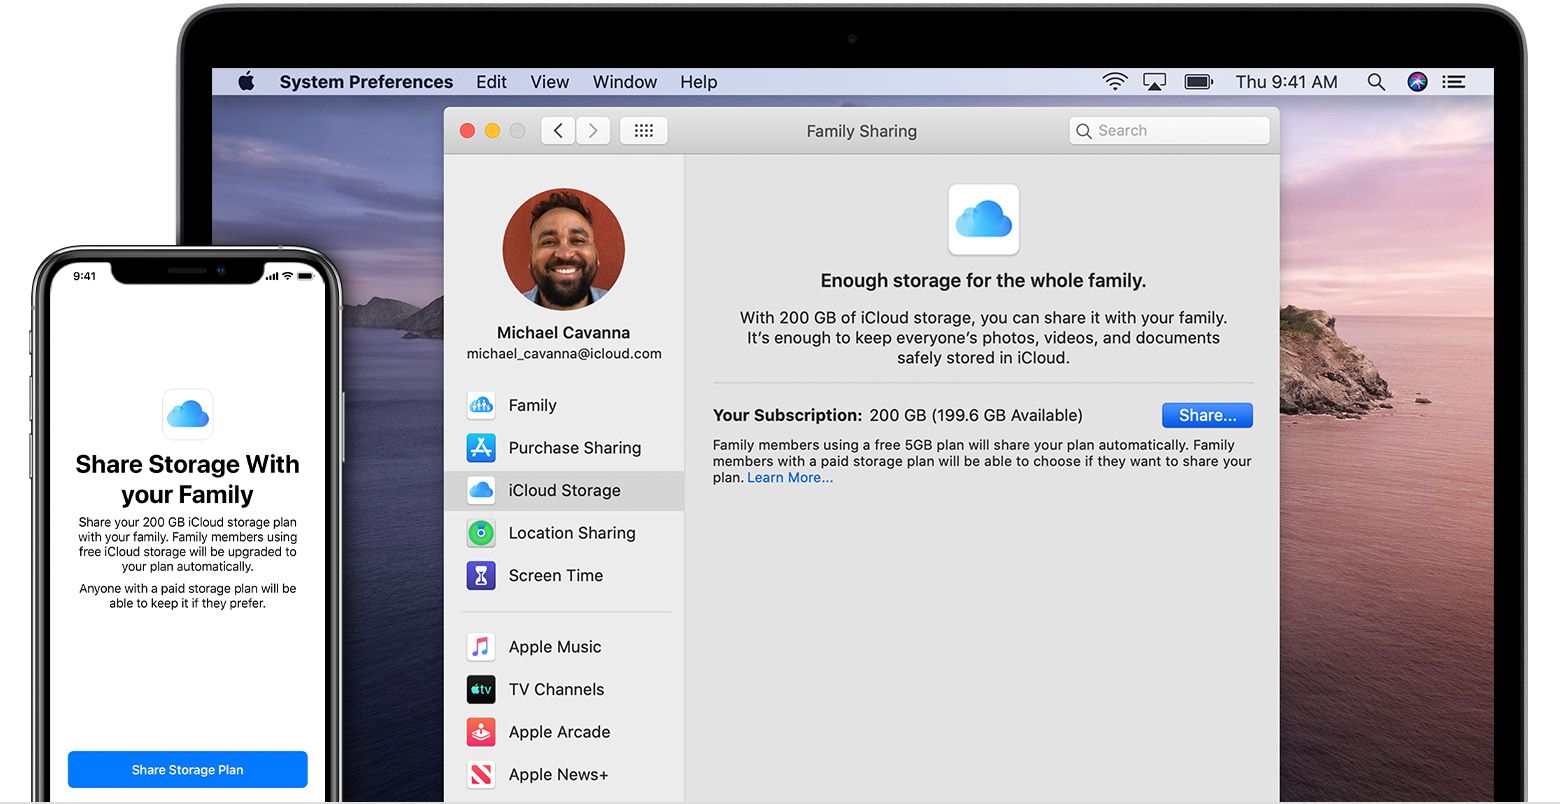 The flexibility of iCloud Family Storage Sharing